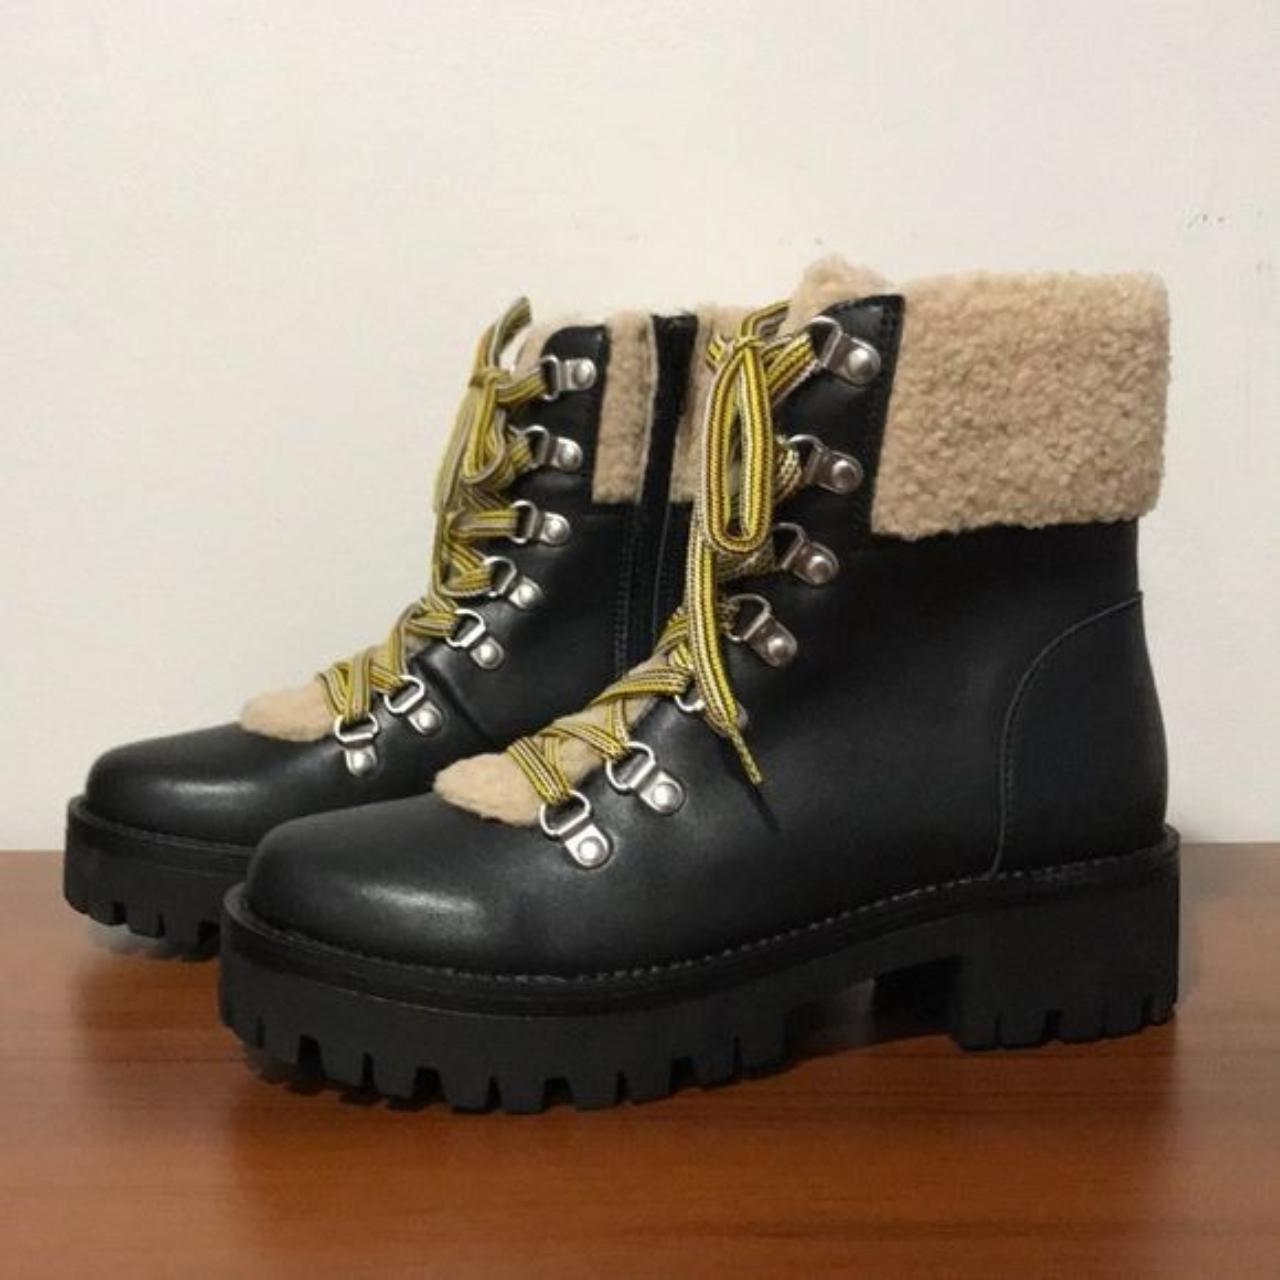 Steve Madden Zipper Lace Up Aniko Ankle Boots in... - Depop